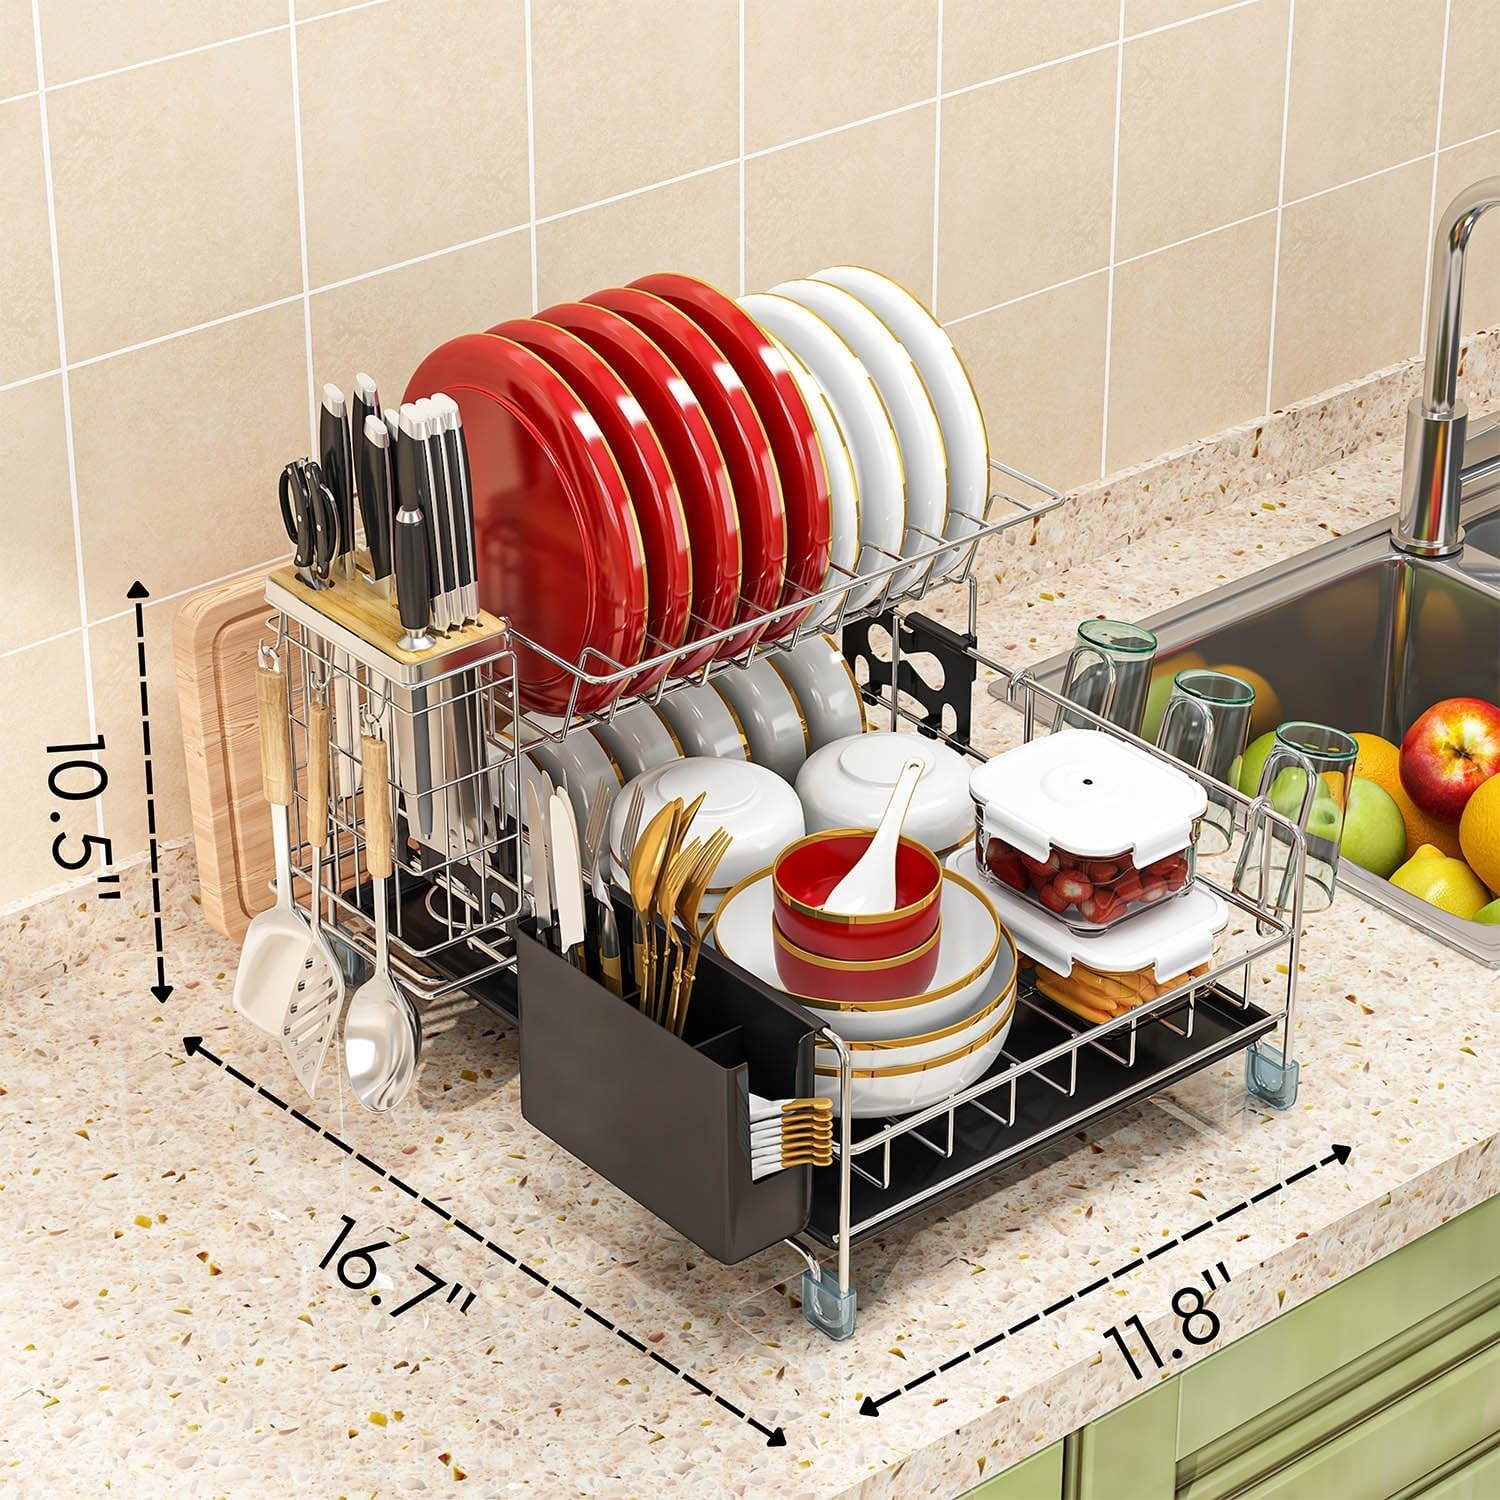 https://ak1.ostkcdn.com/images/products/is/images/direct/05eea4d7f4f7560365d28627068de6d231922d8b/2-Tier-Stainless-Steel-Dish-Drying-Rack-for-Kitchen-Counter.jpg